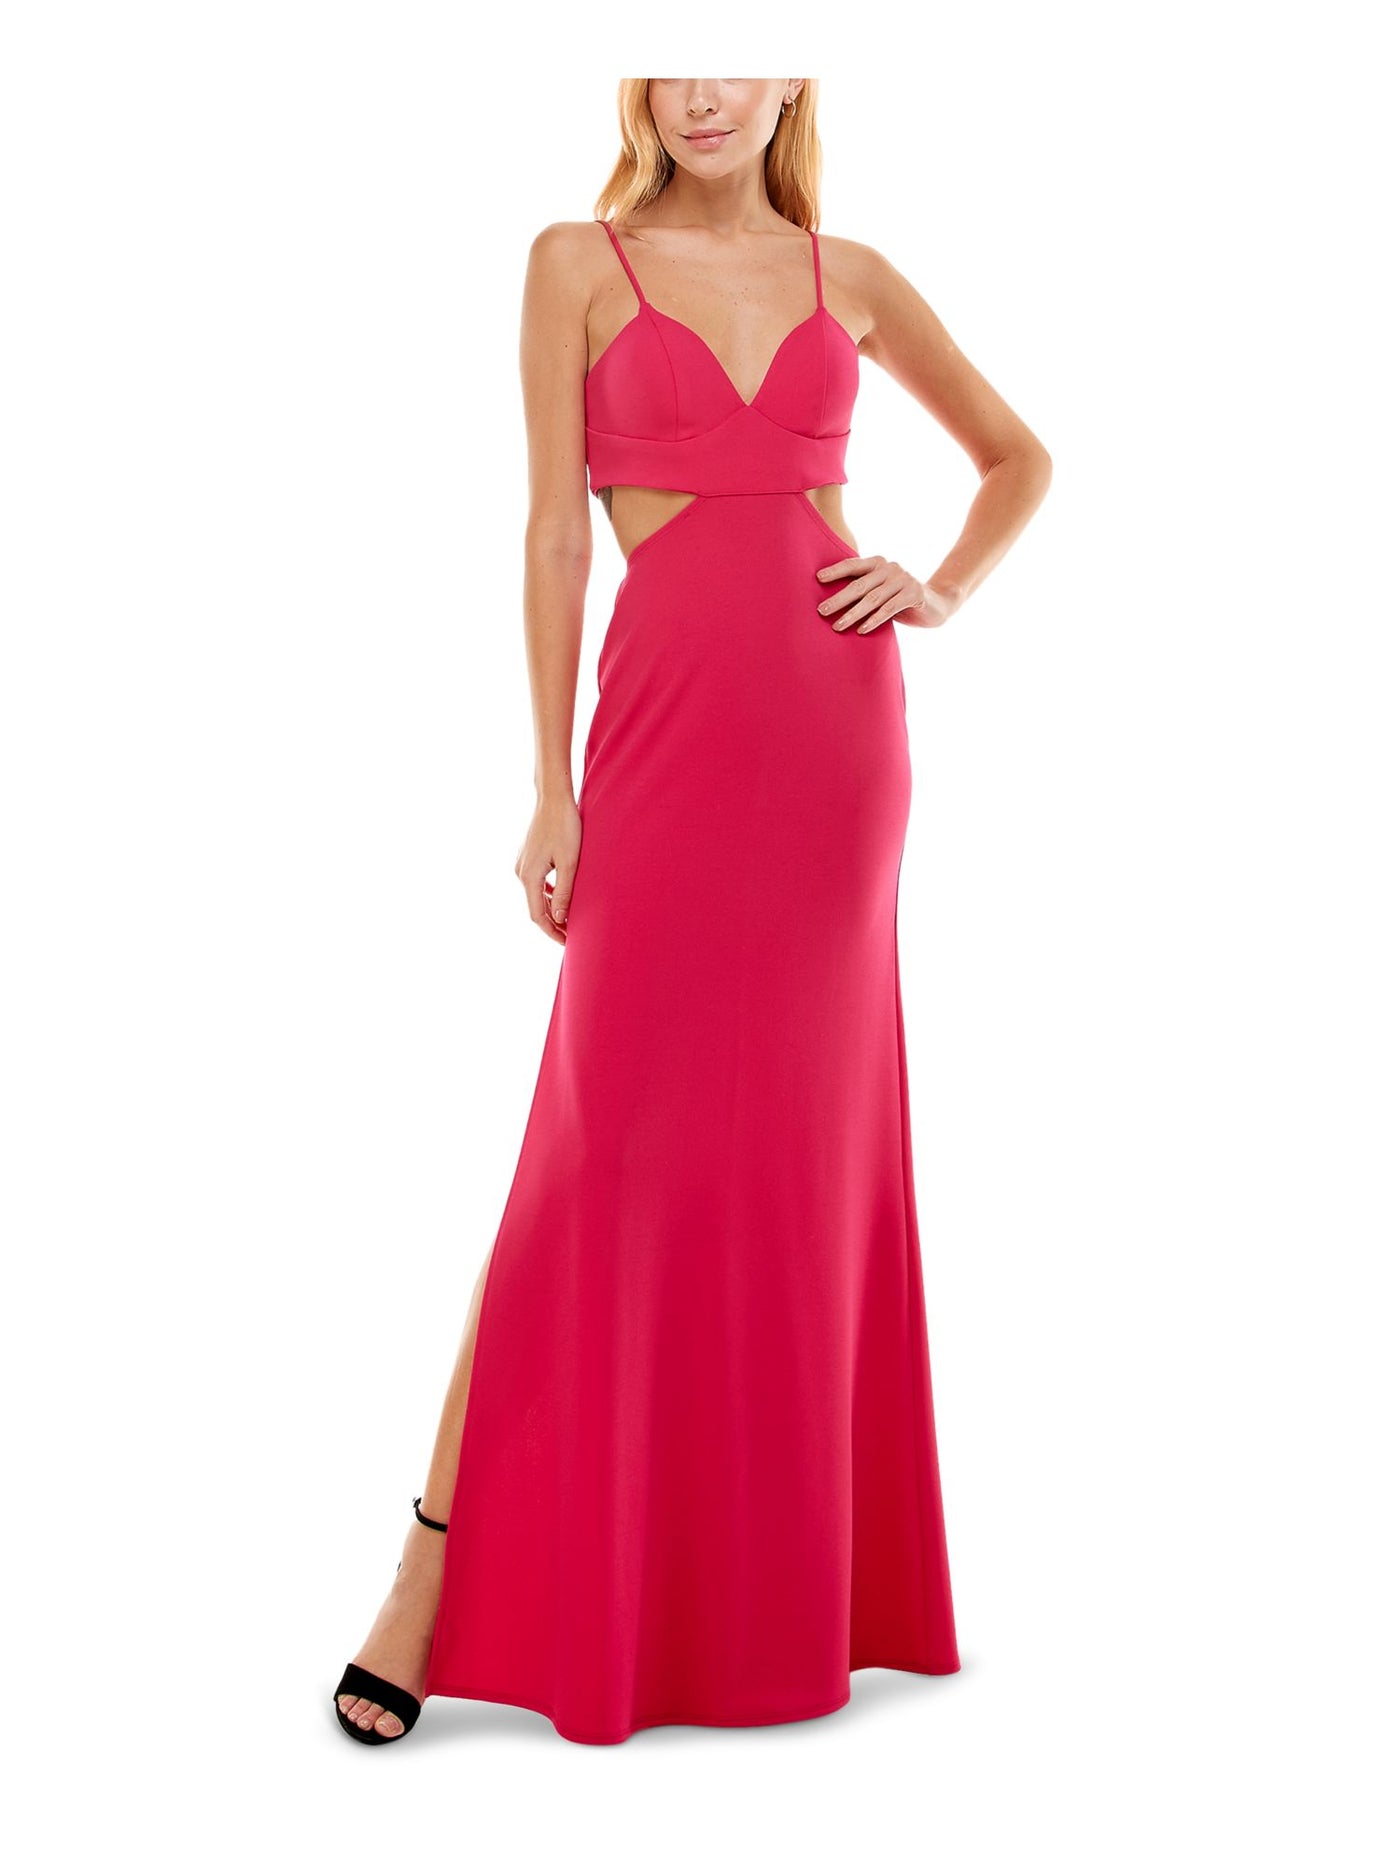 CRYSTAL DOLLS Womens Pink Stretch Cut Out Zippered Slitted Spaghetti Strap V Neck Full-Length Prom Gown Dress Juniors 11